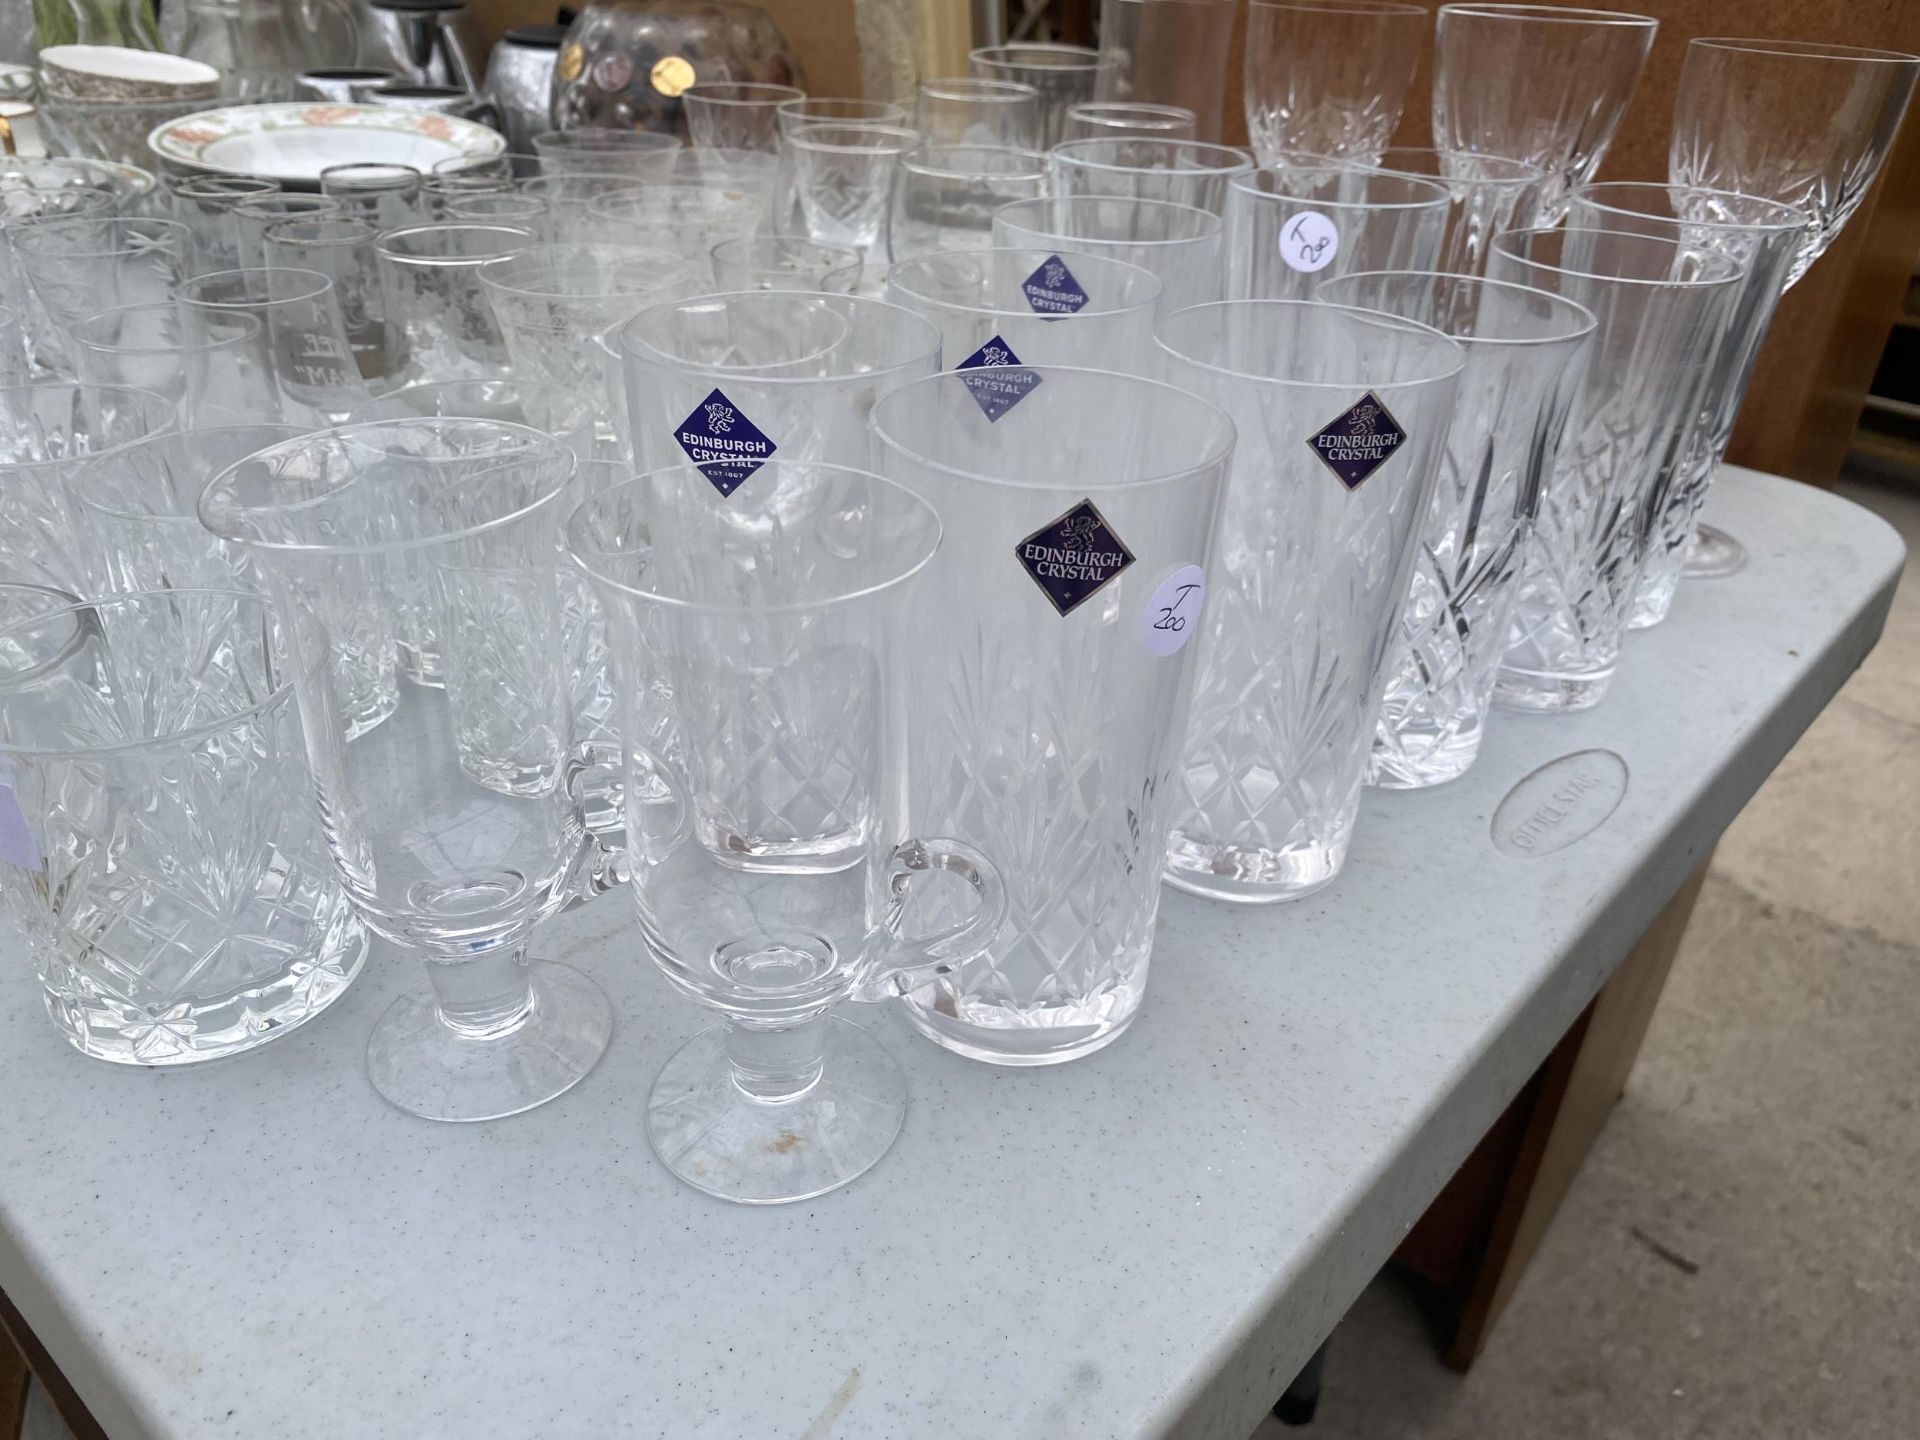 AN ASSORTMENT OF GLASS WARE TO INCLUDE EDINBURGH CRYSTAL TUMBLERS, SHERRY GLASSES AND WINE GLASSES - Image 4 of 6